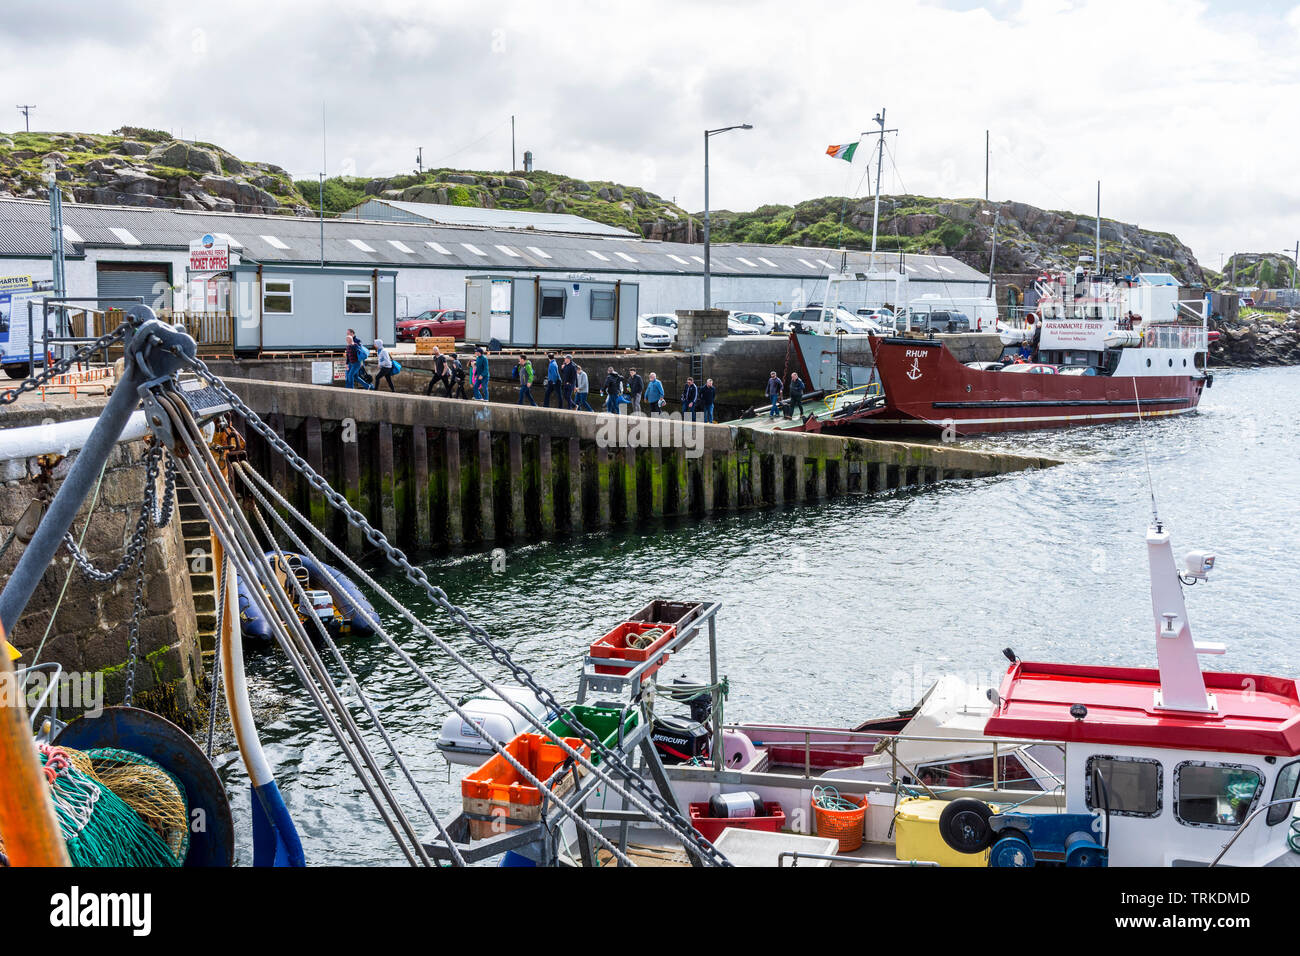 Foot passengers and vehicles disembark from Arranmore Island Ferry at Burtonport harbour, County Donegal, Ireland Stock Photo